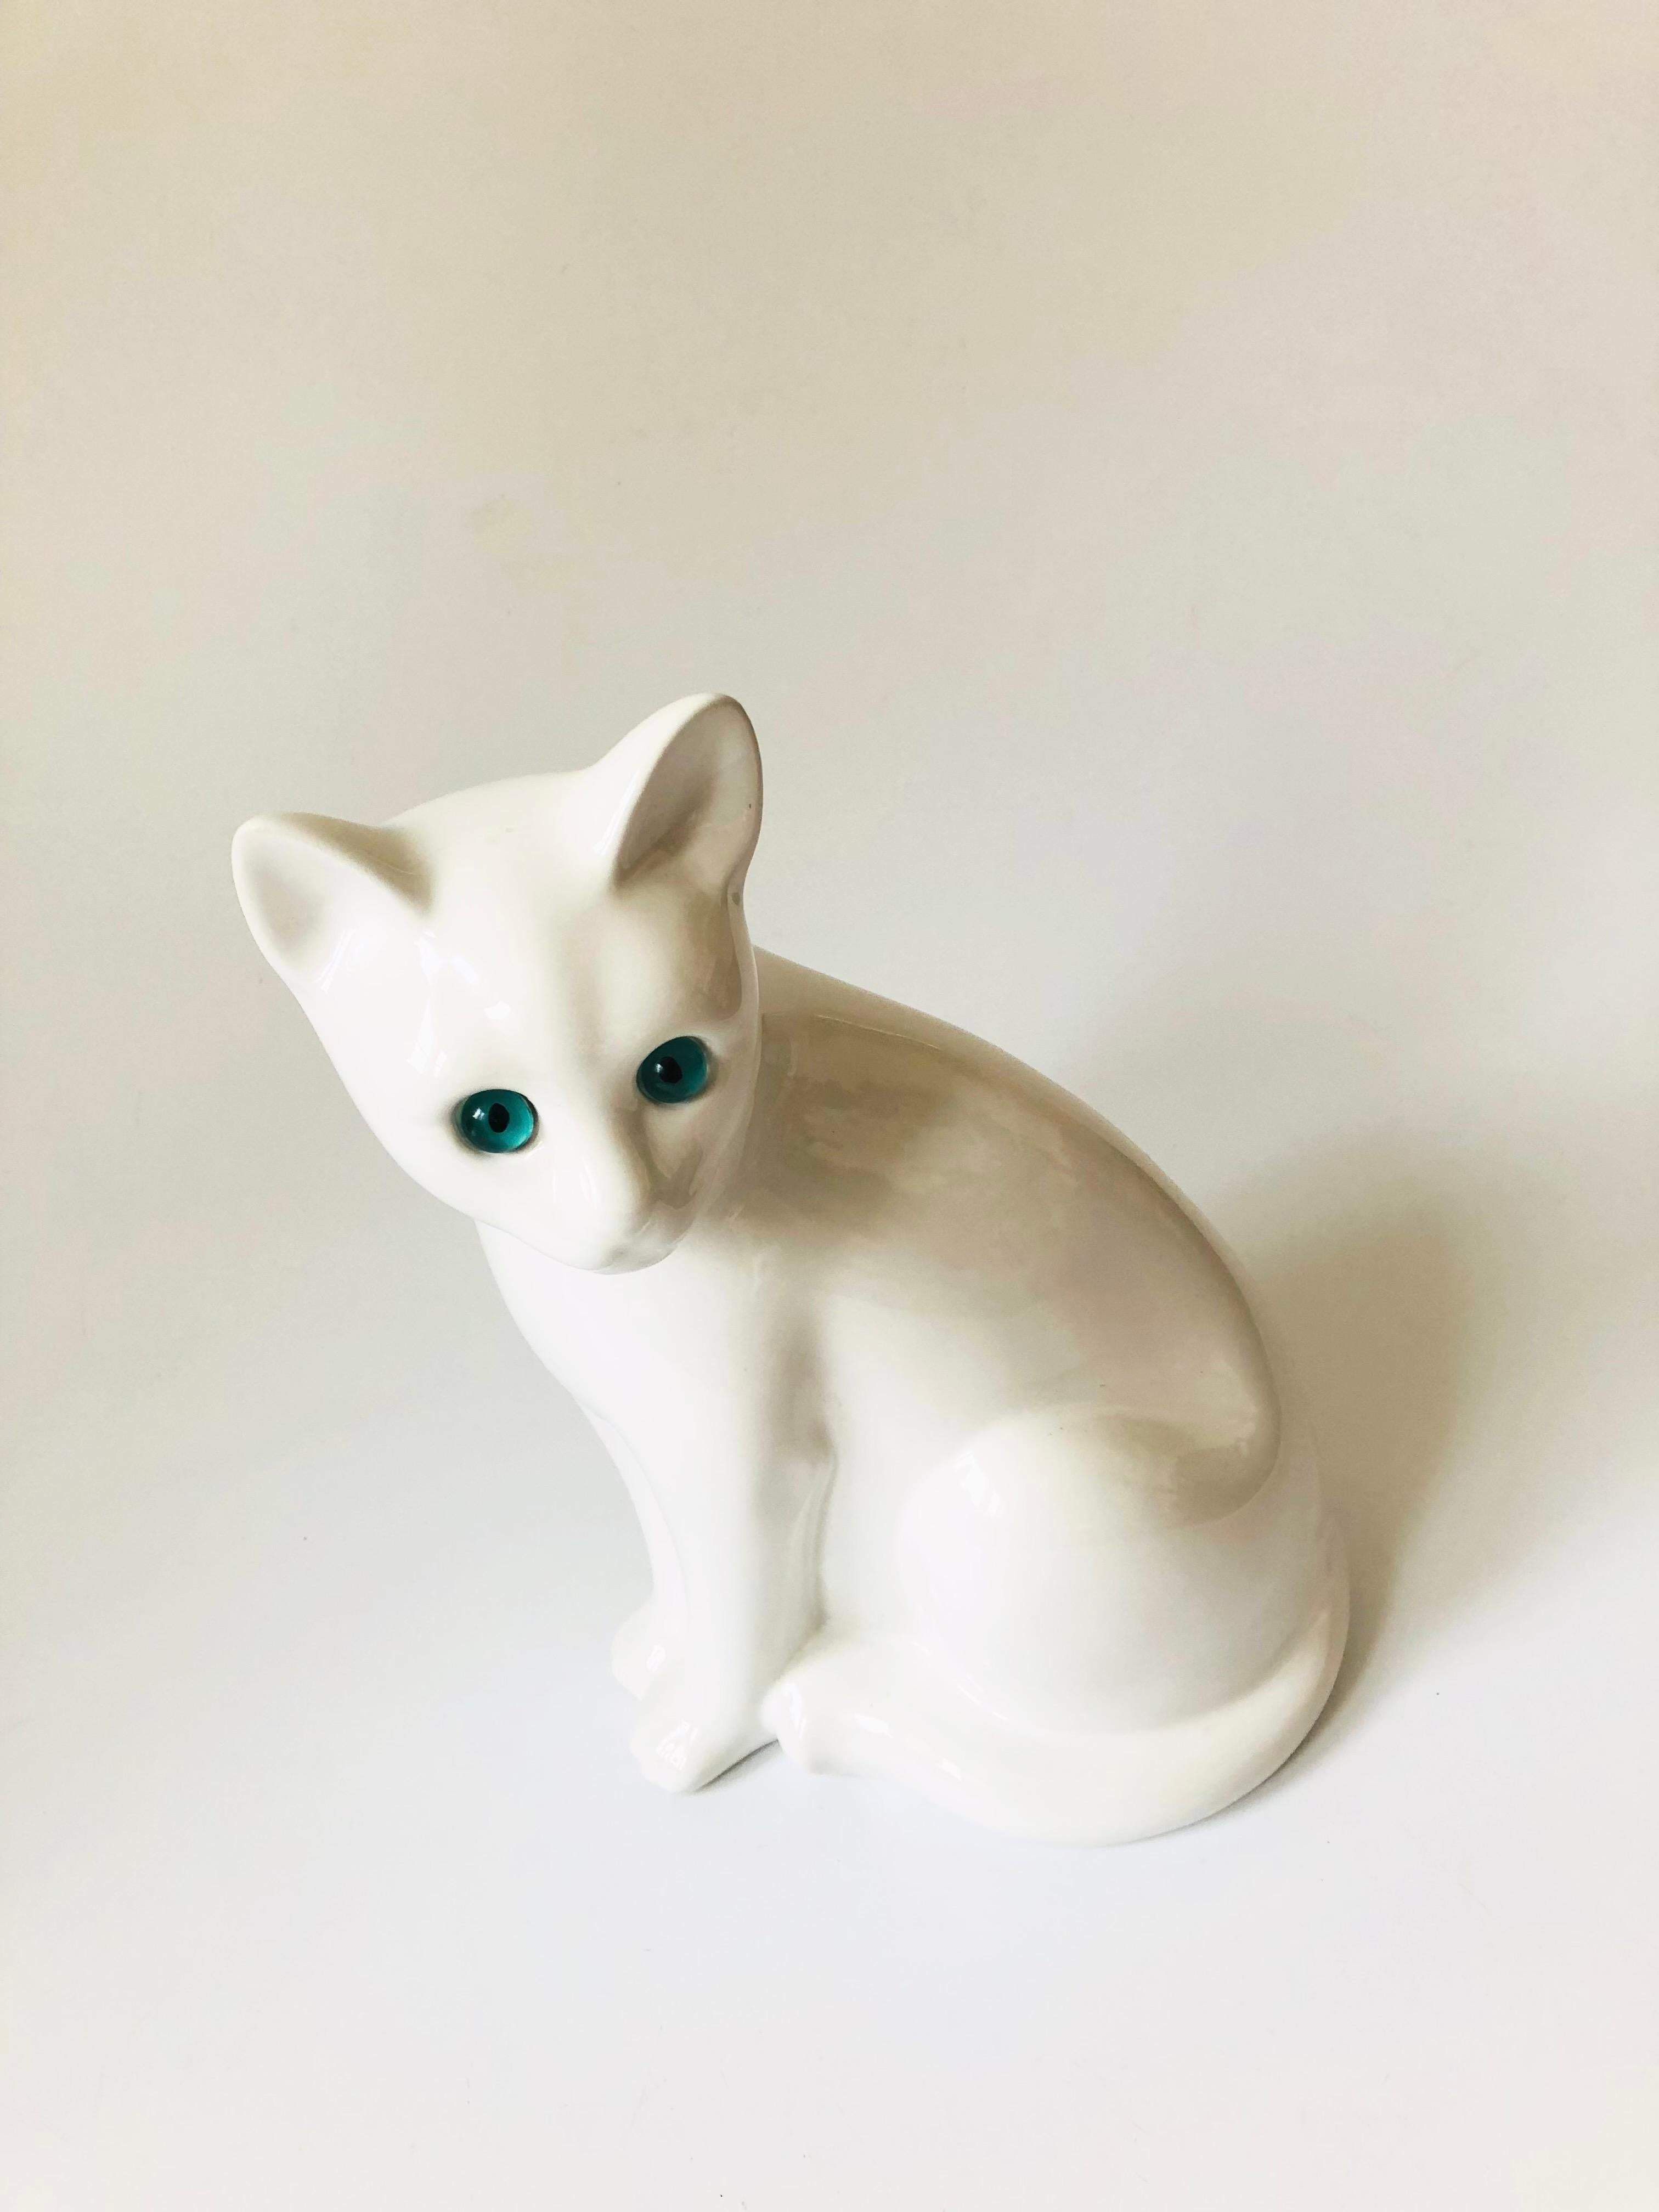 A vintage ceramic cat sculpture finished in a glossy white glaze with blue eyes. Made in Portugal by Elpa Alcobaca, marked on the base.

